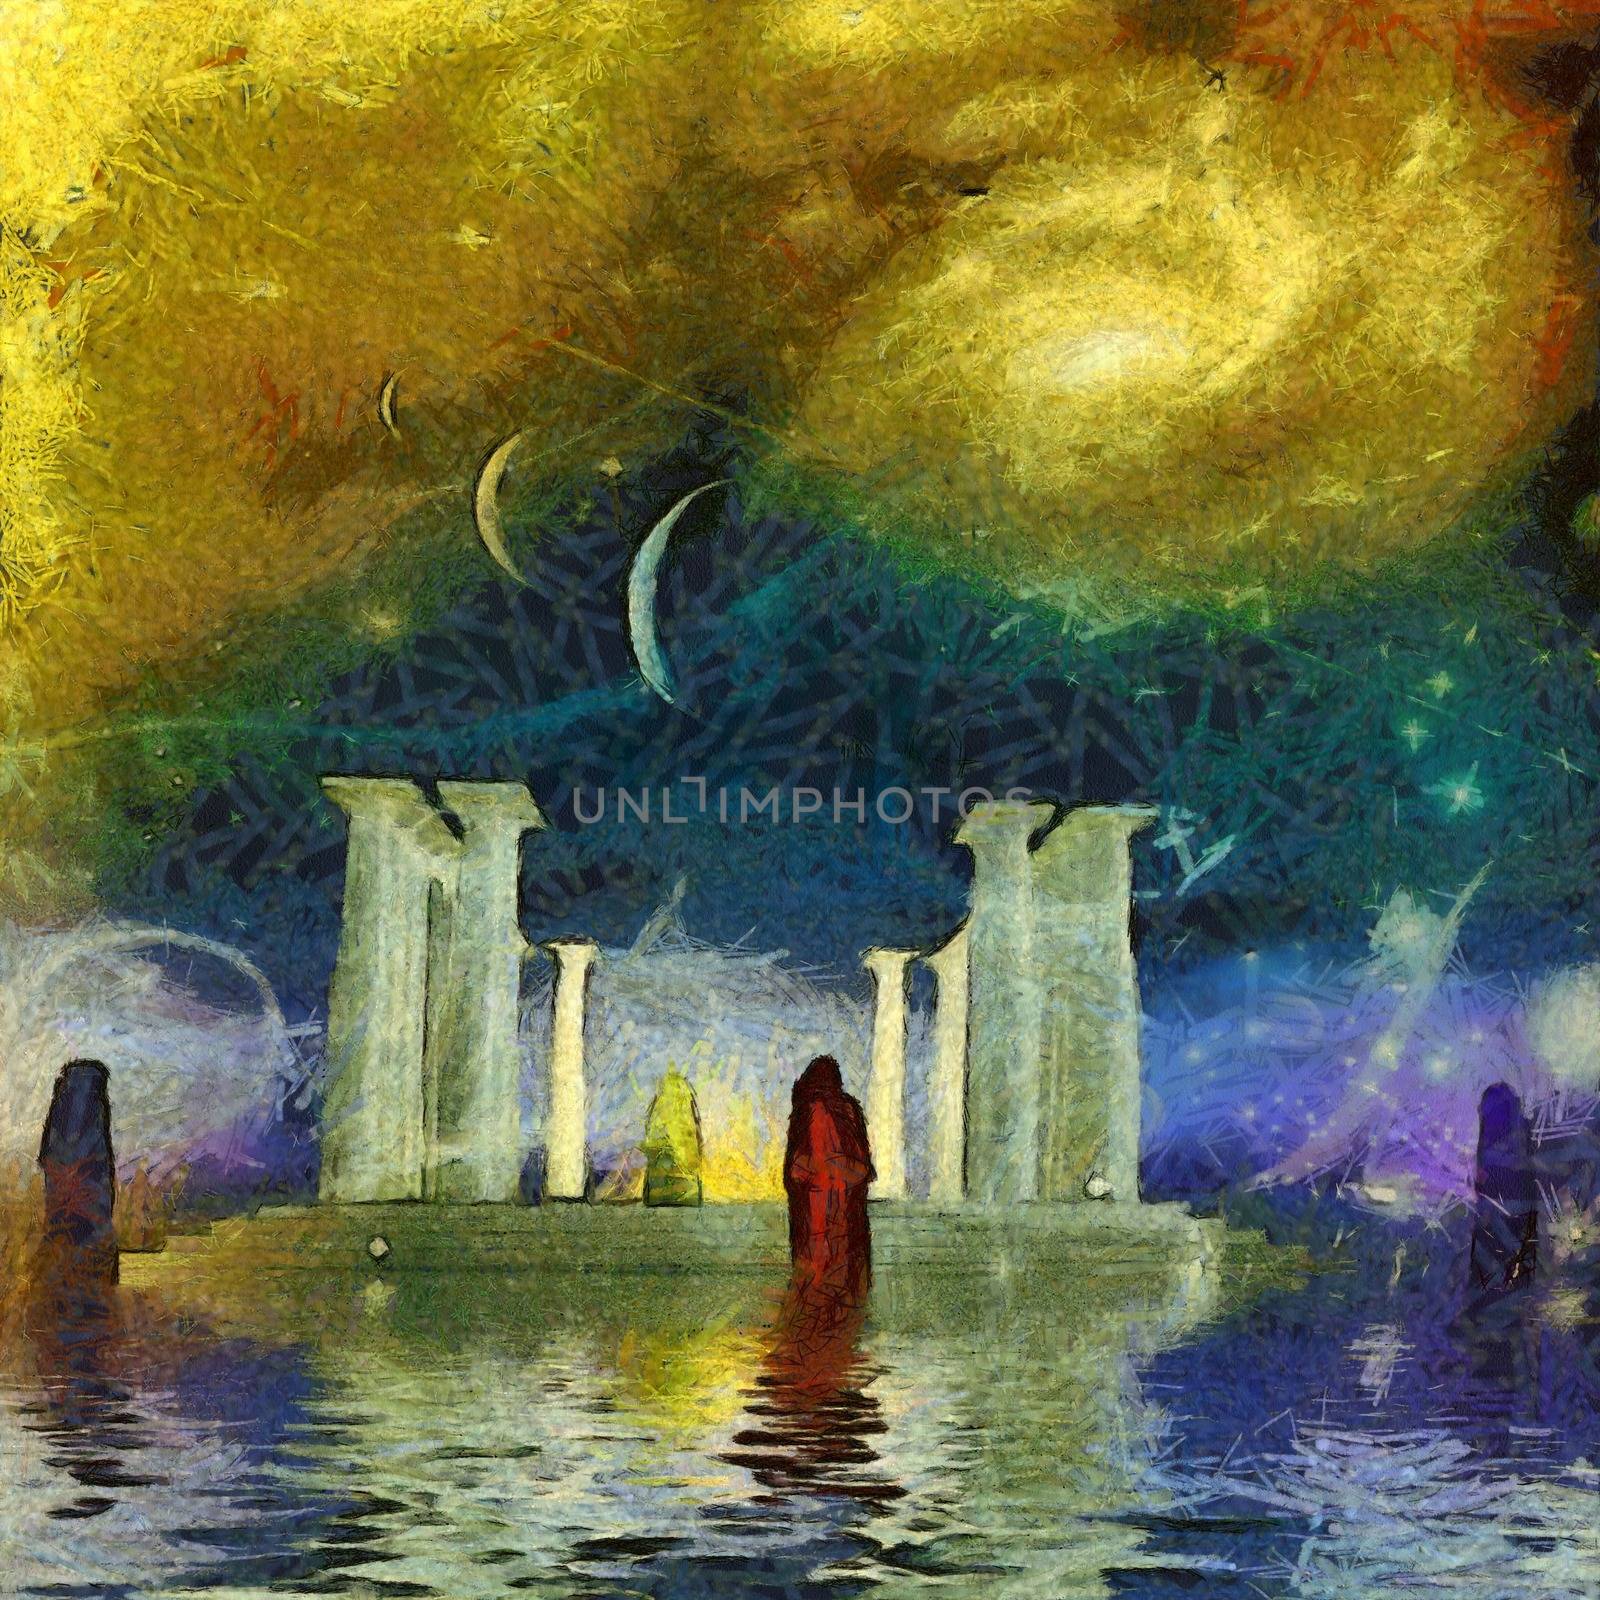 Surreal painting. White temple on water surface. Monks around him. Parade of planets and galaxy in the sky.